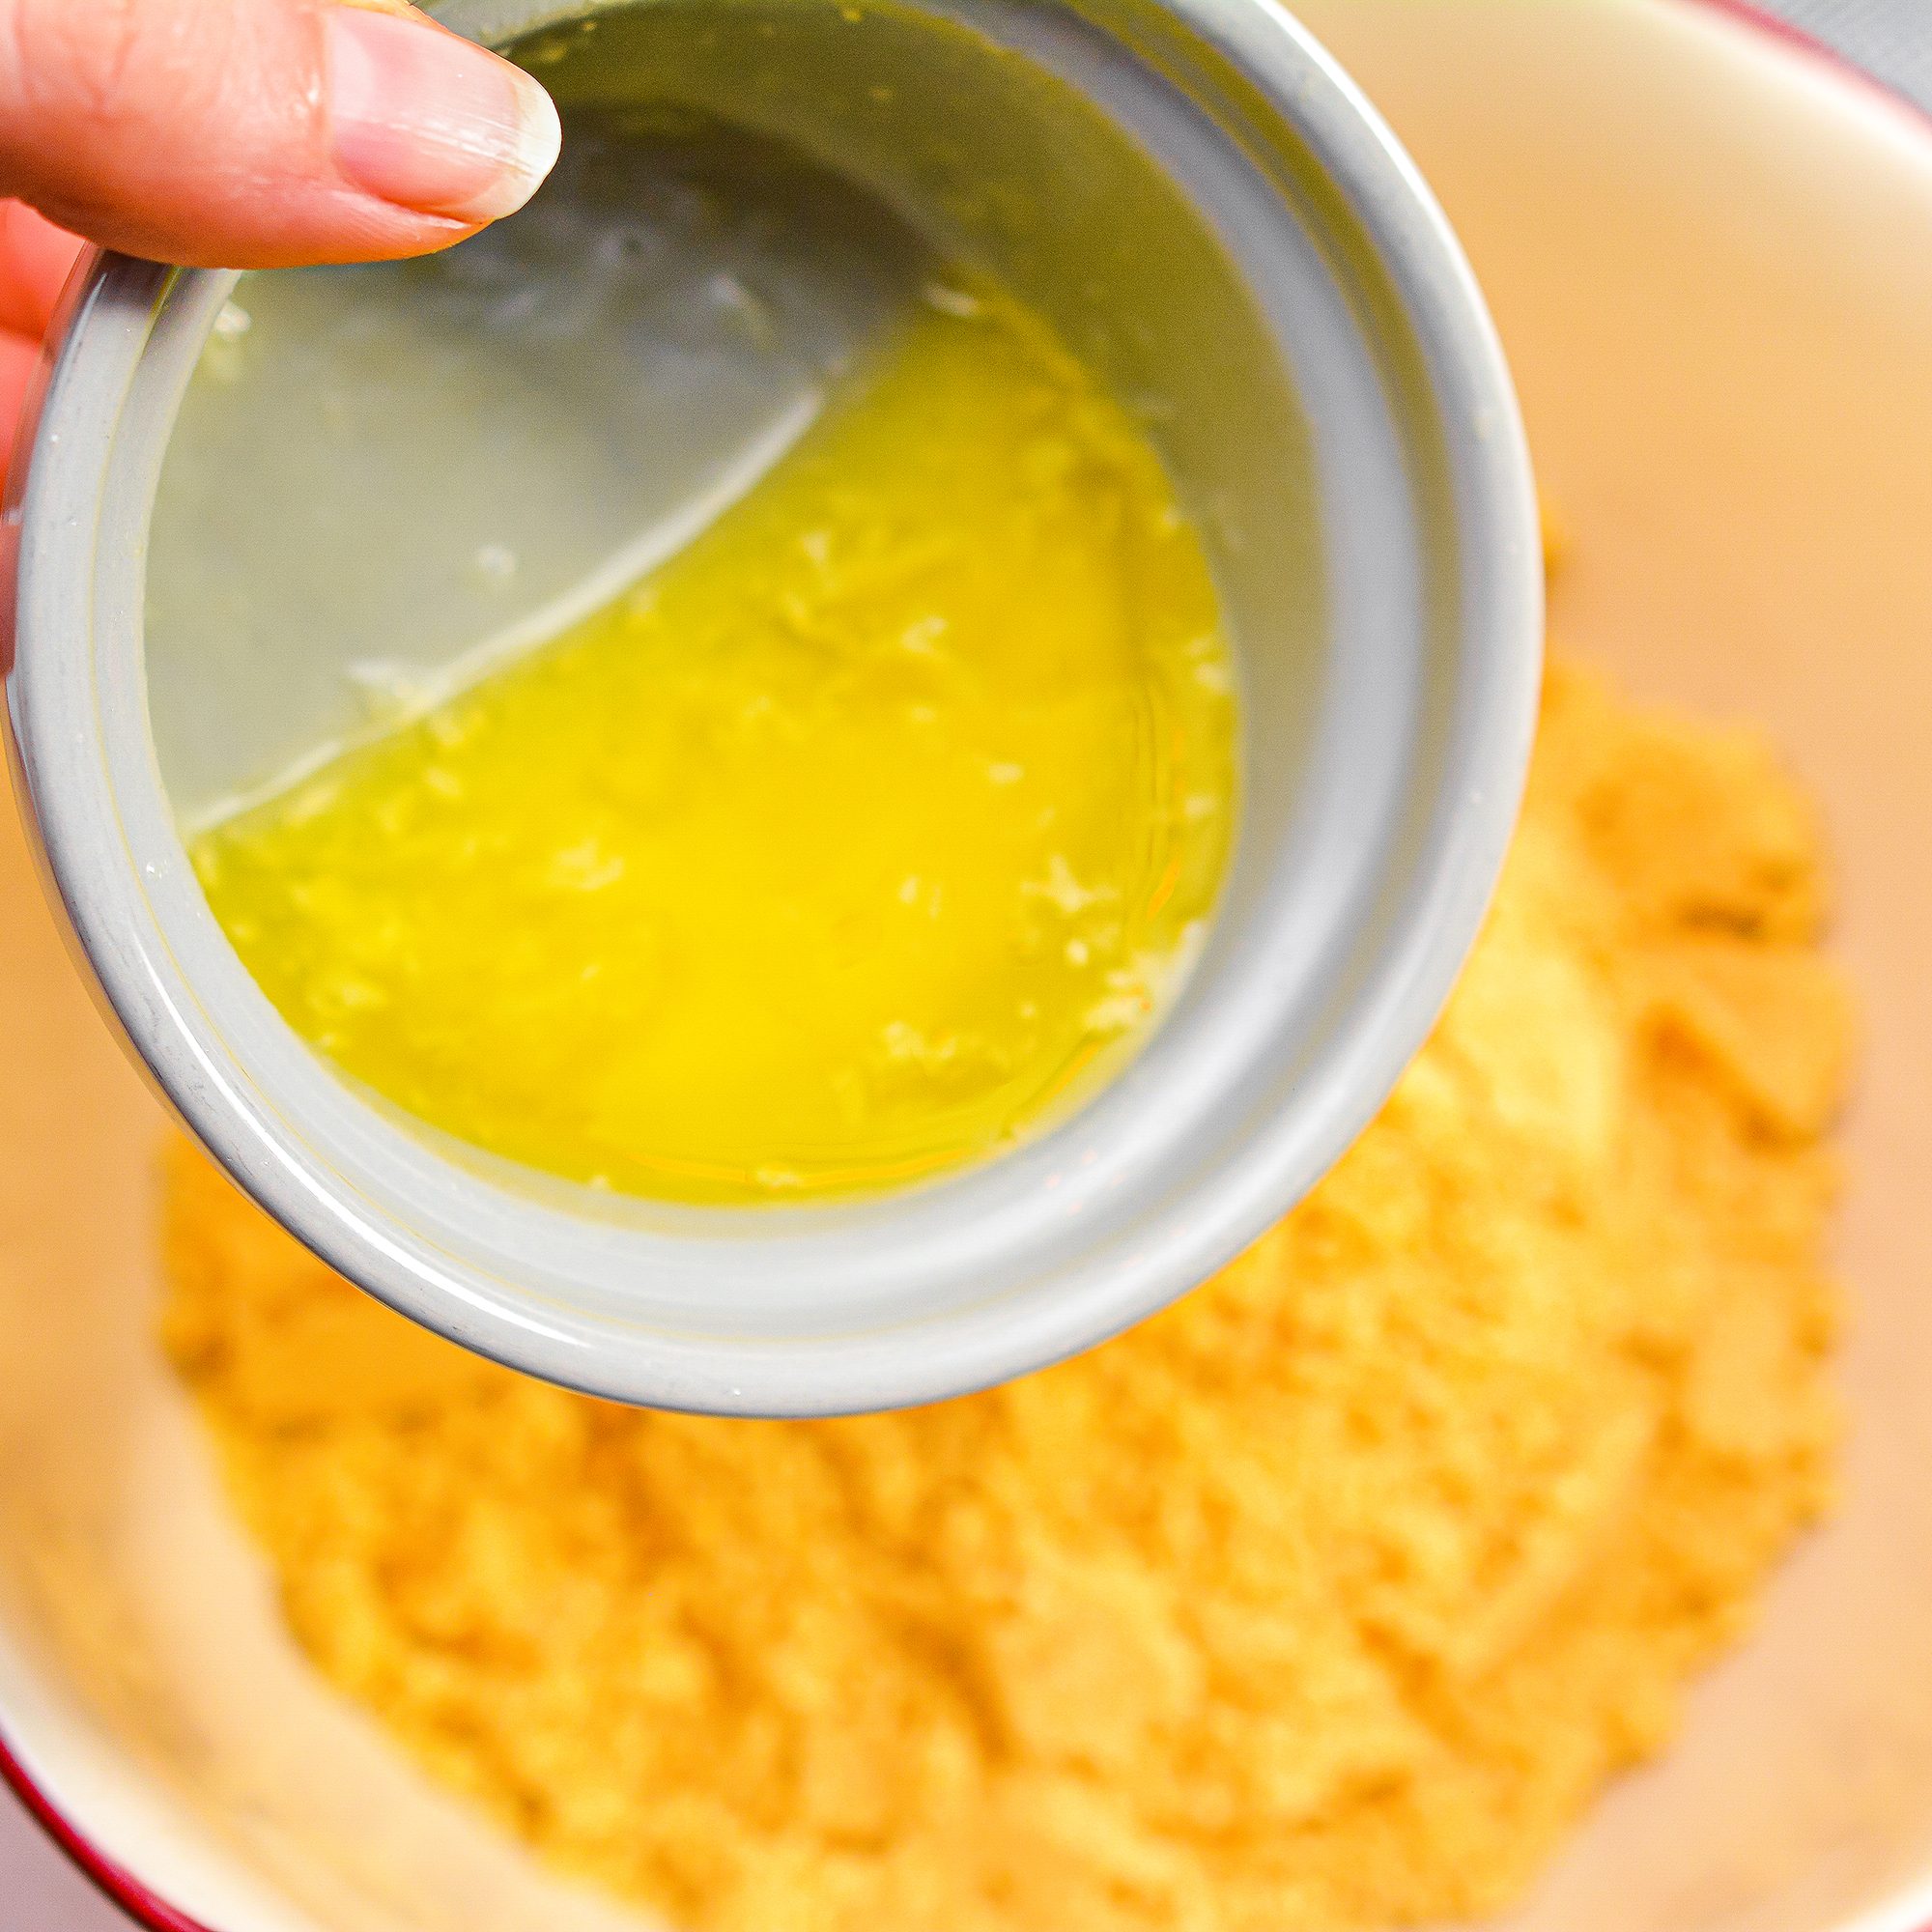 Mix the Jello in with the baked crumbs until well combined.